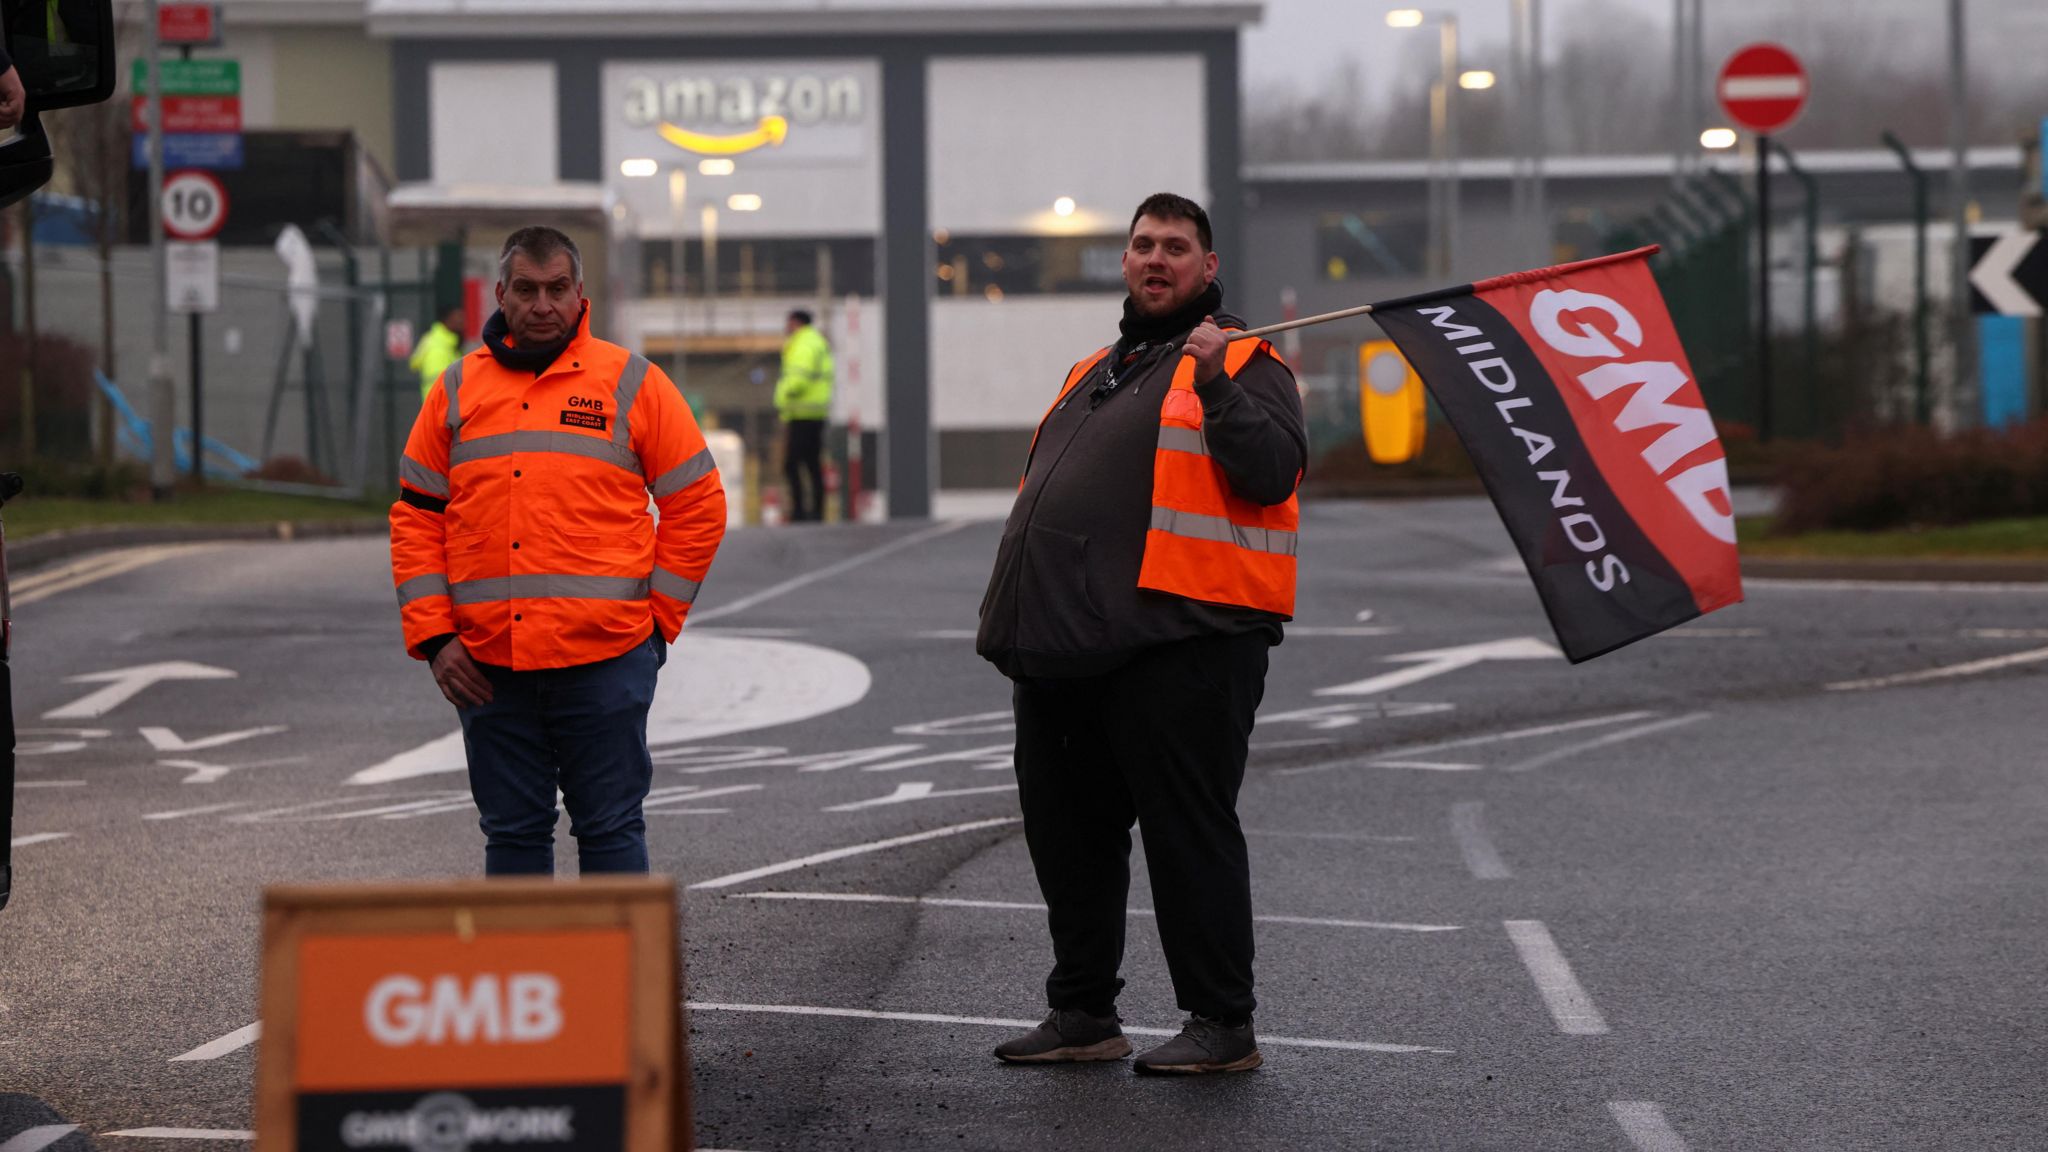 Workers on strike in Coventry